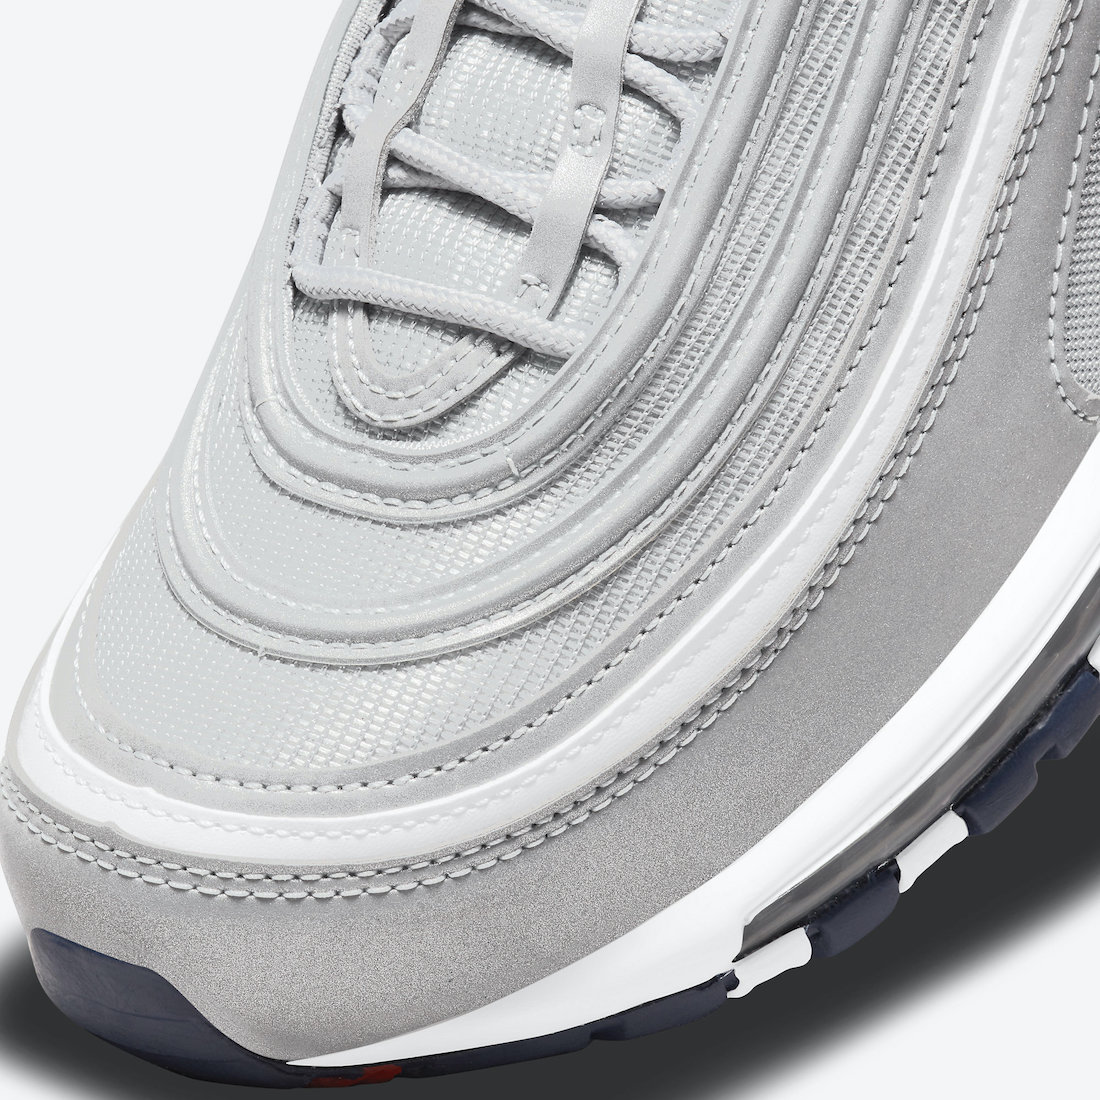 ike Air Max 97 Puerto Rico DH2319-001 Release Date Price